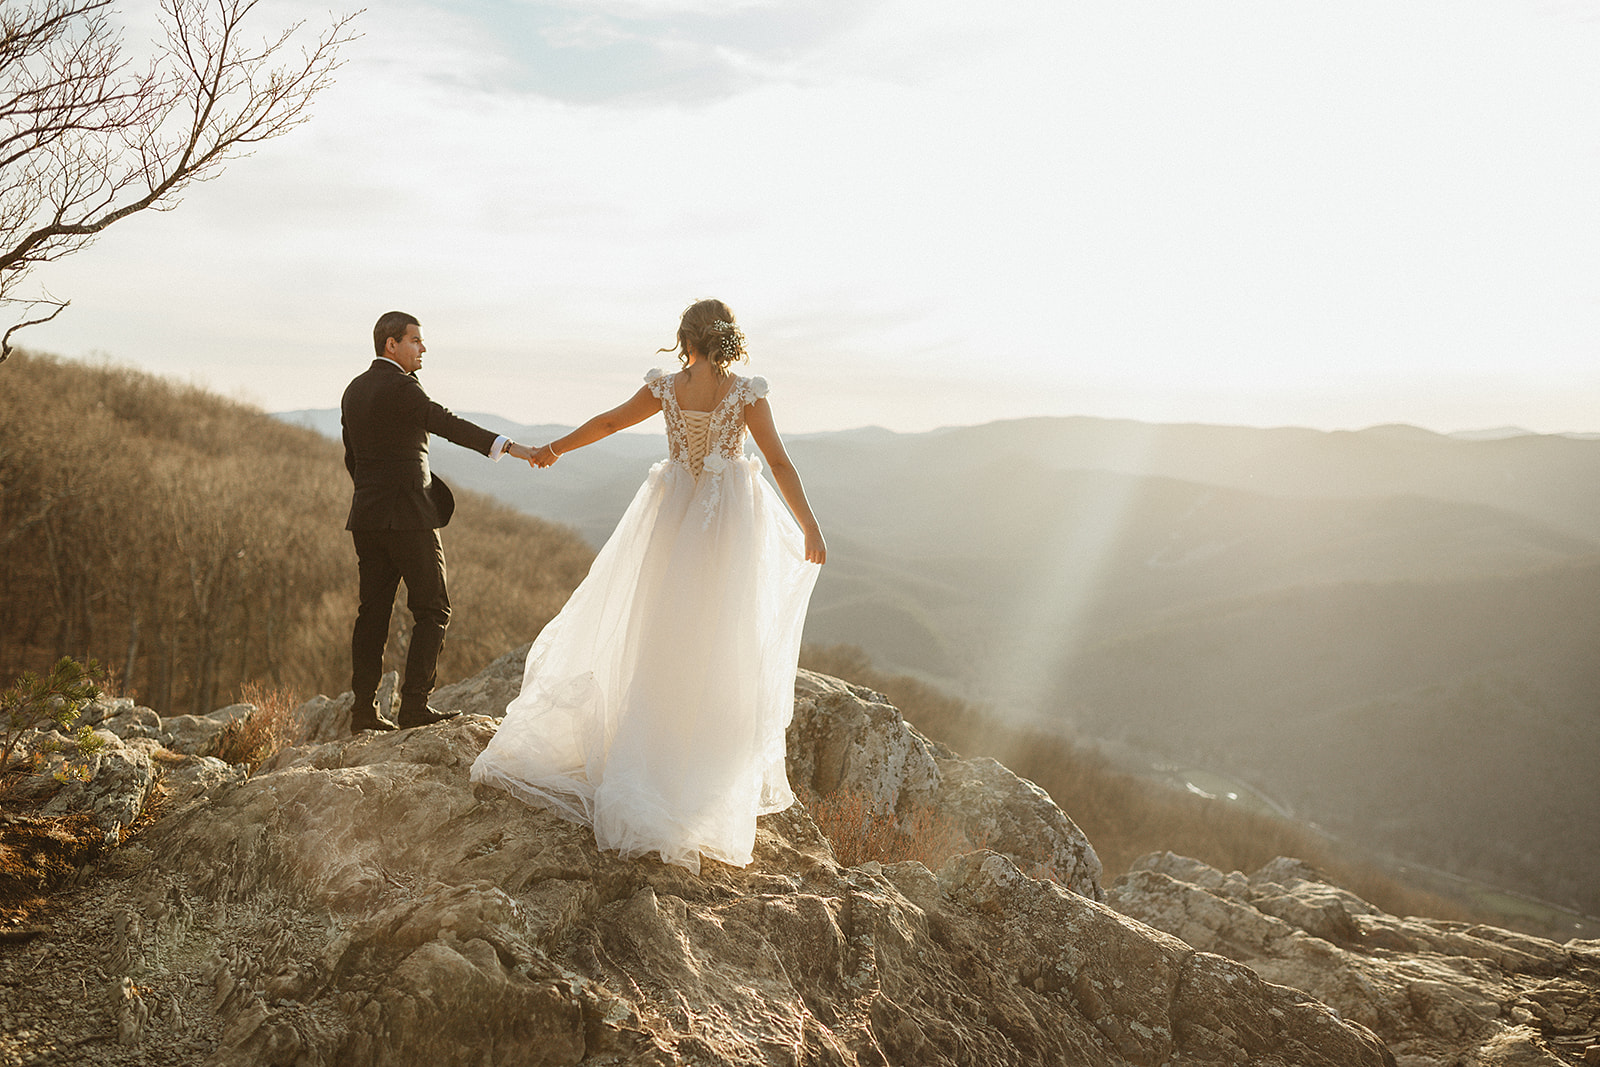 bride and groom holding hands and hiking up a mountains together as the sun shines down at them captured by Virginia wedding photographer